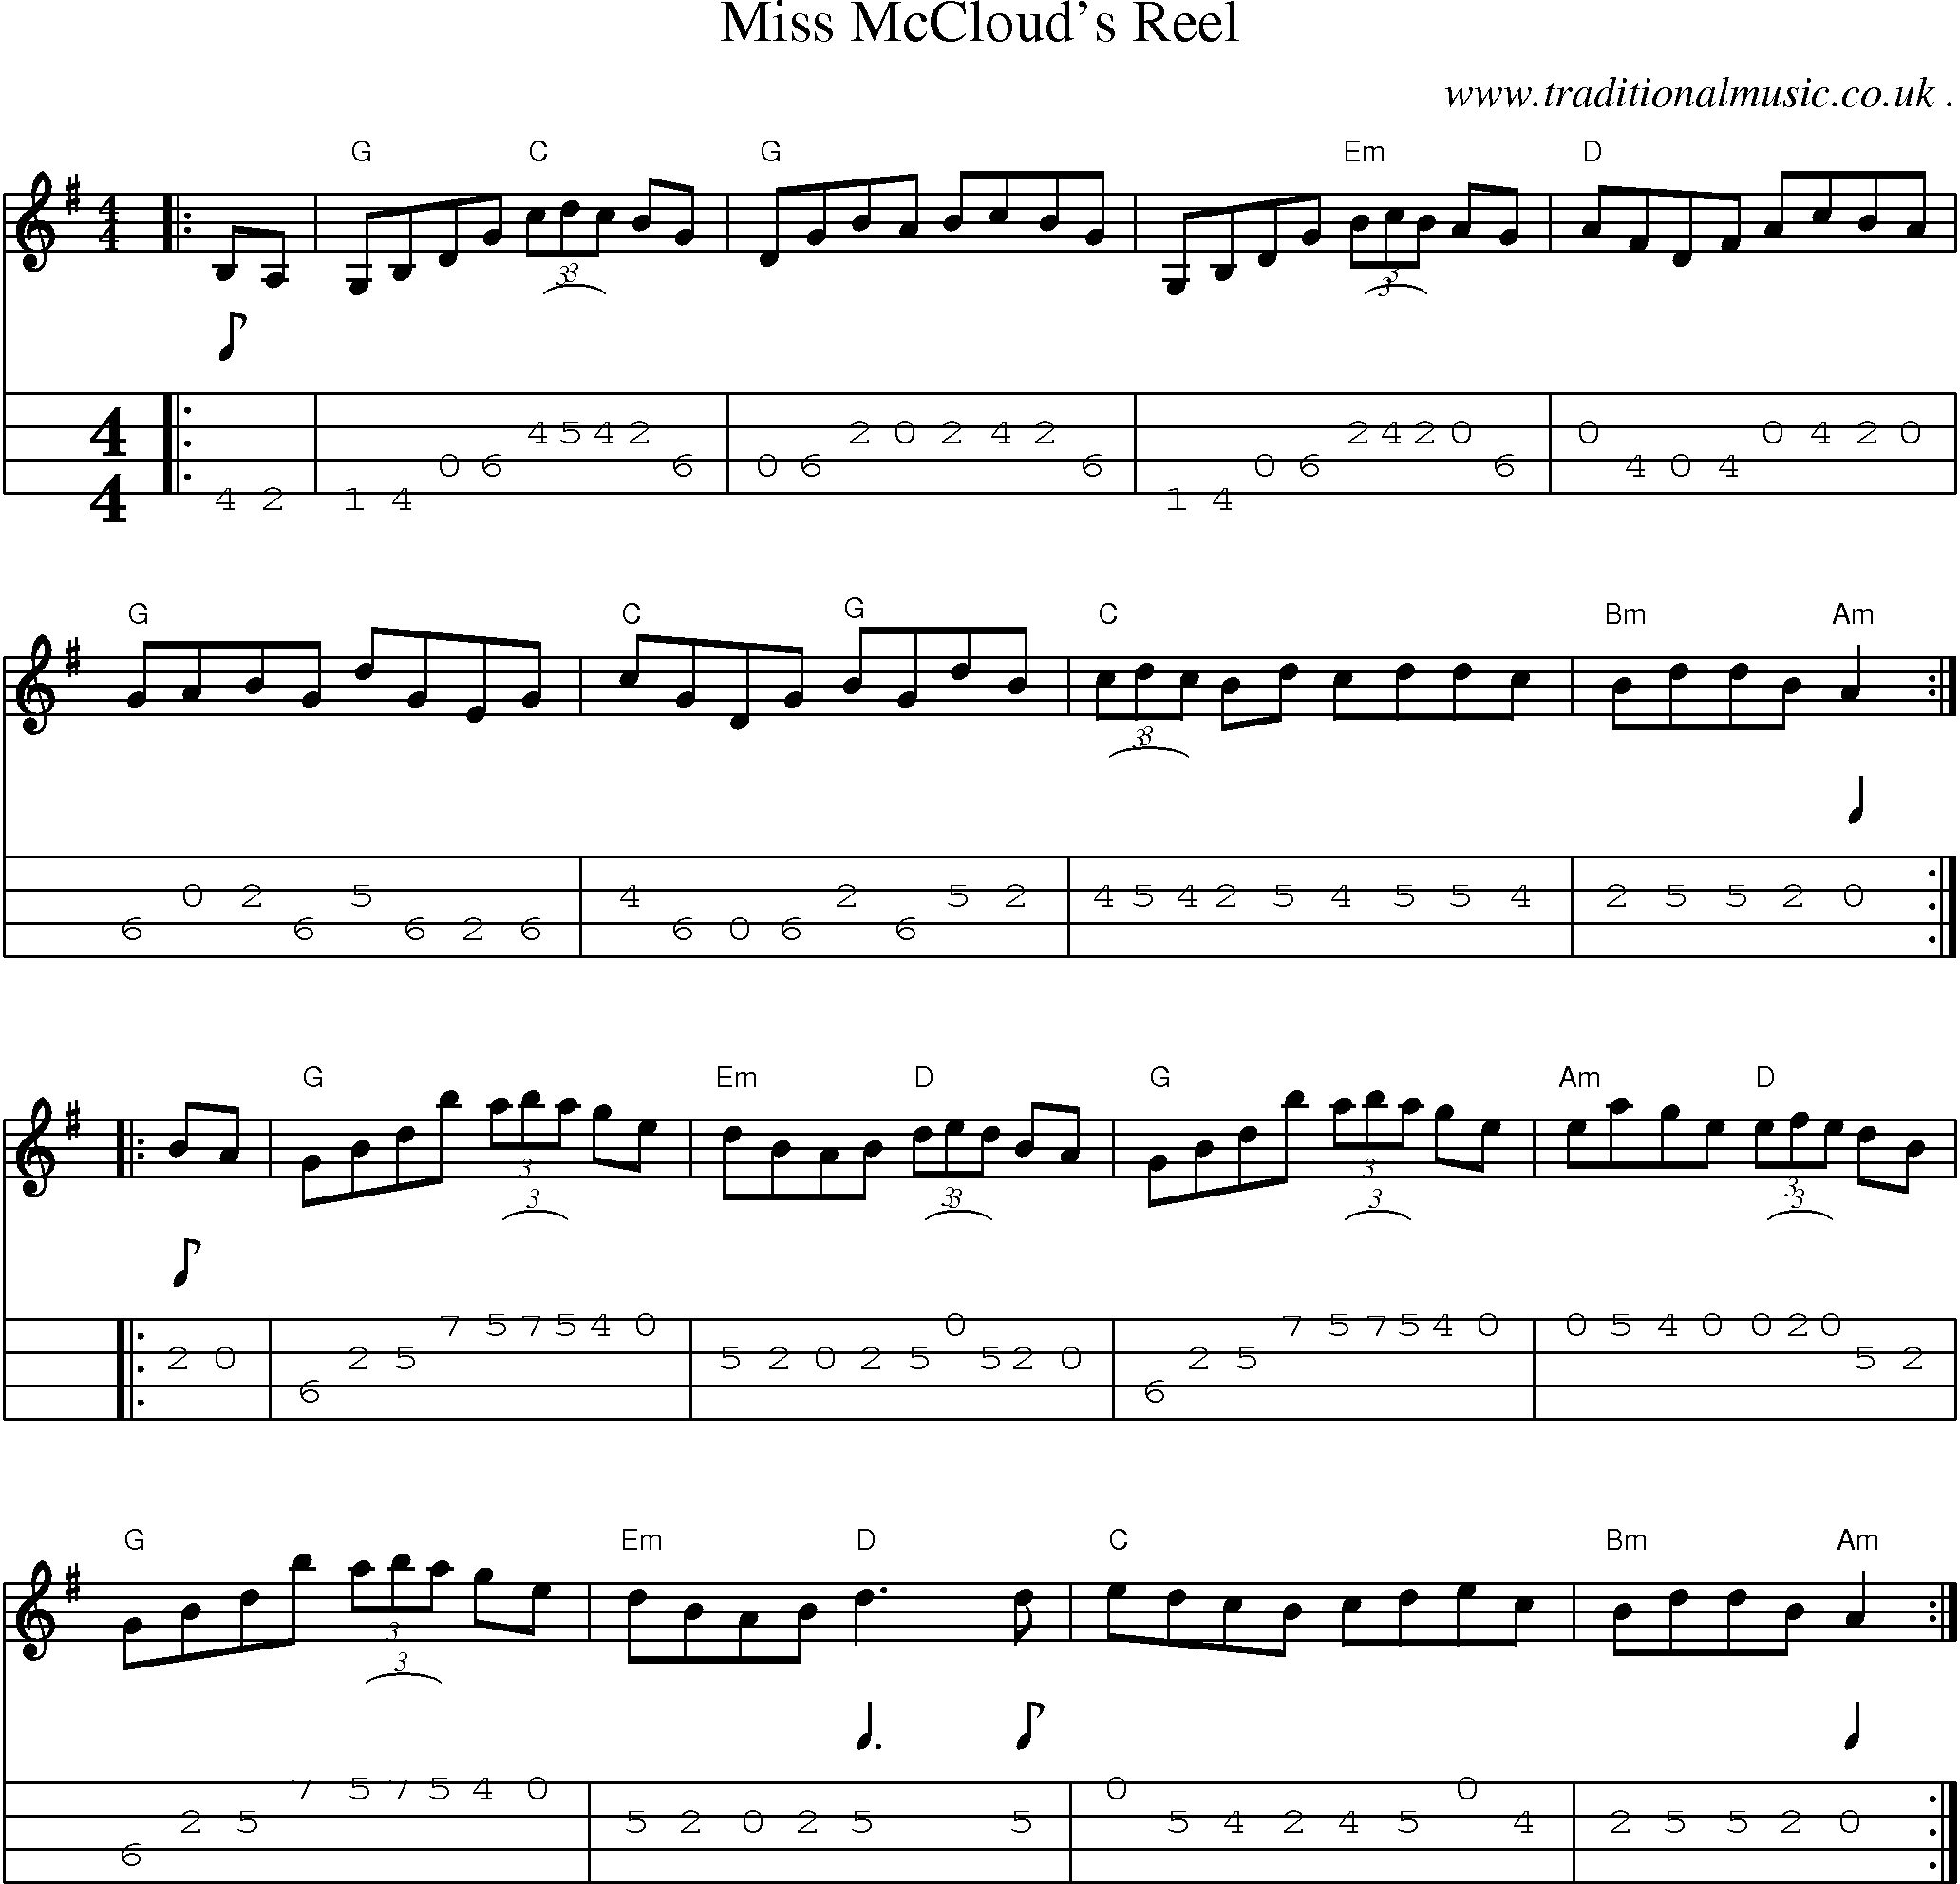 Music Score and Guitar Tabs for Miss Mcclouds Reel